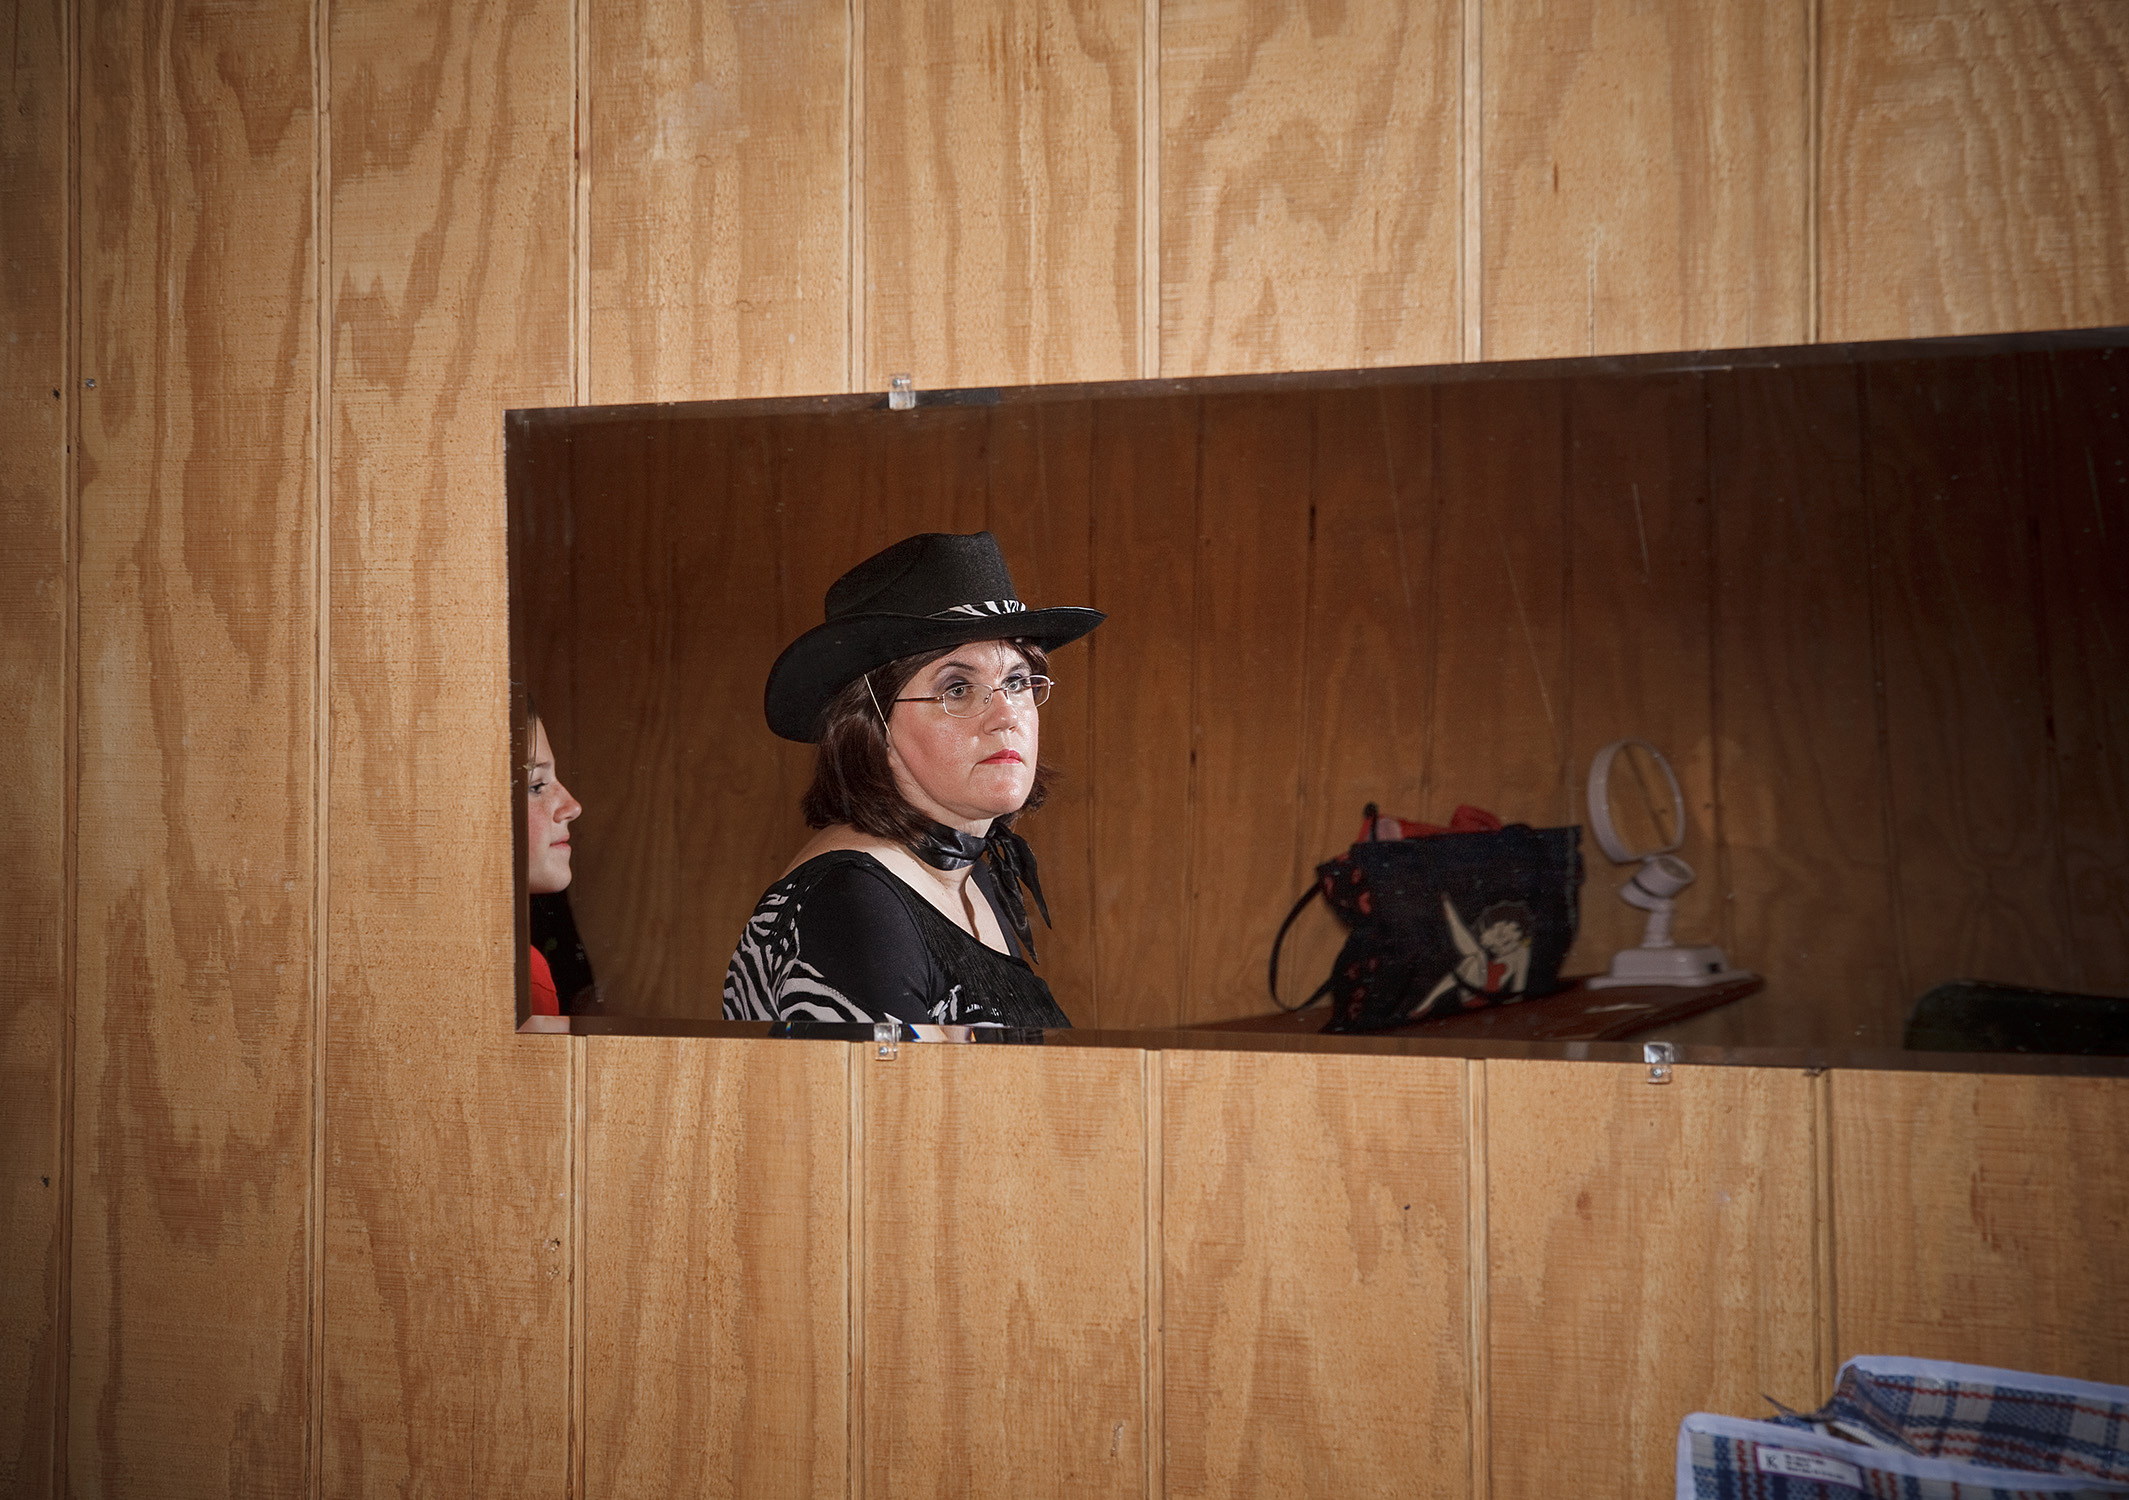 Portrait of a talent show contestant at the Wilson County Fair in Lebanon, Tennessee by Kristina Krug, a photojournalist and editorial photographer documenting the rural south.